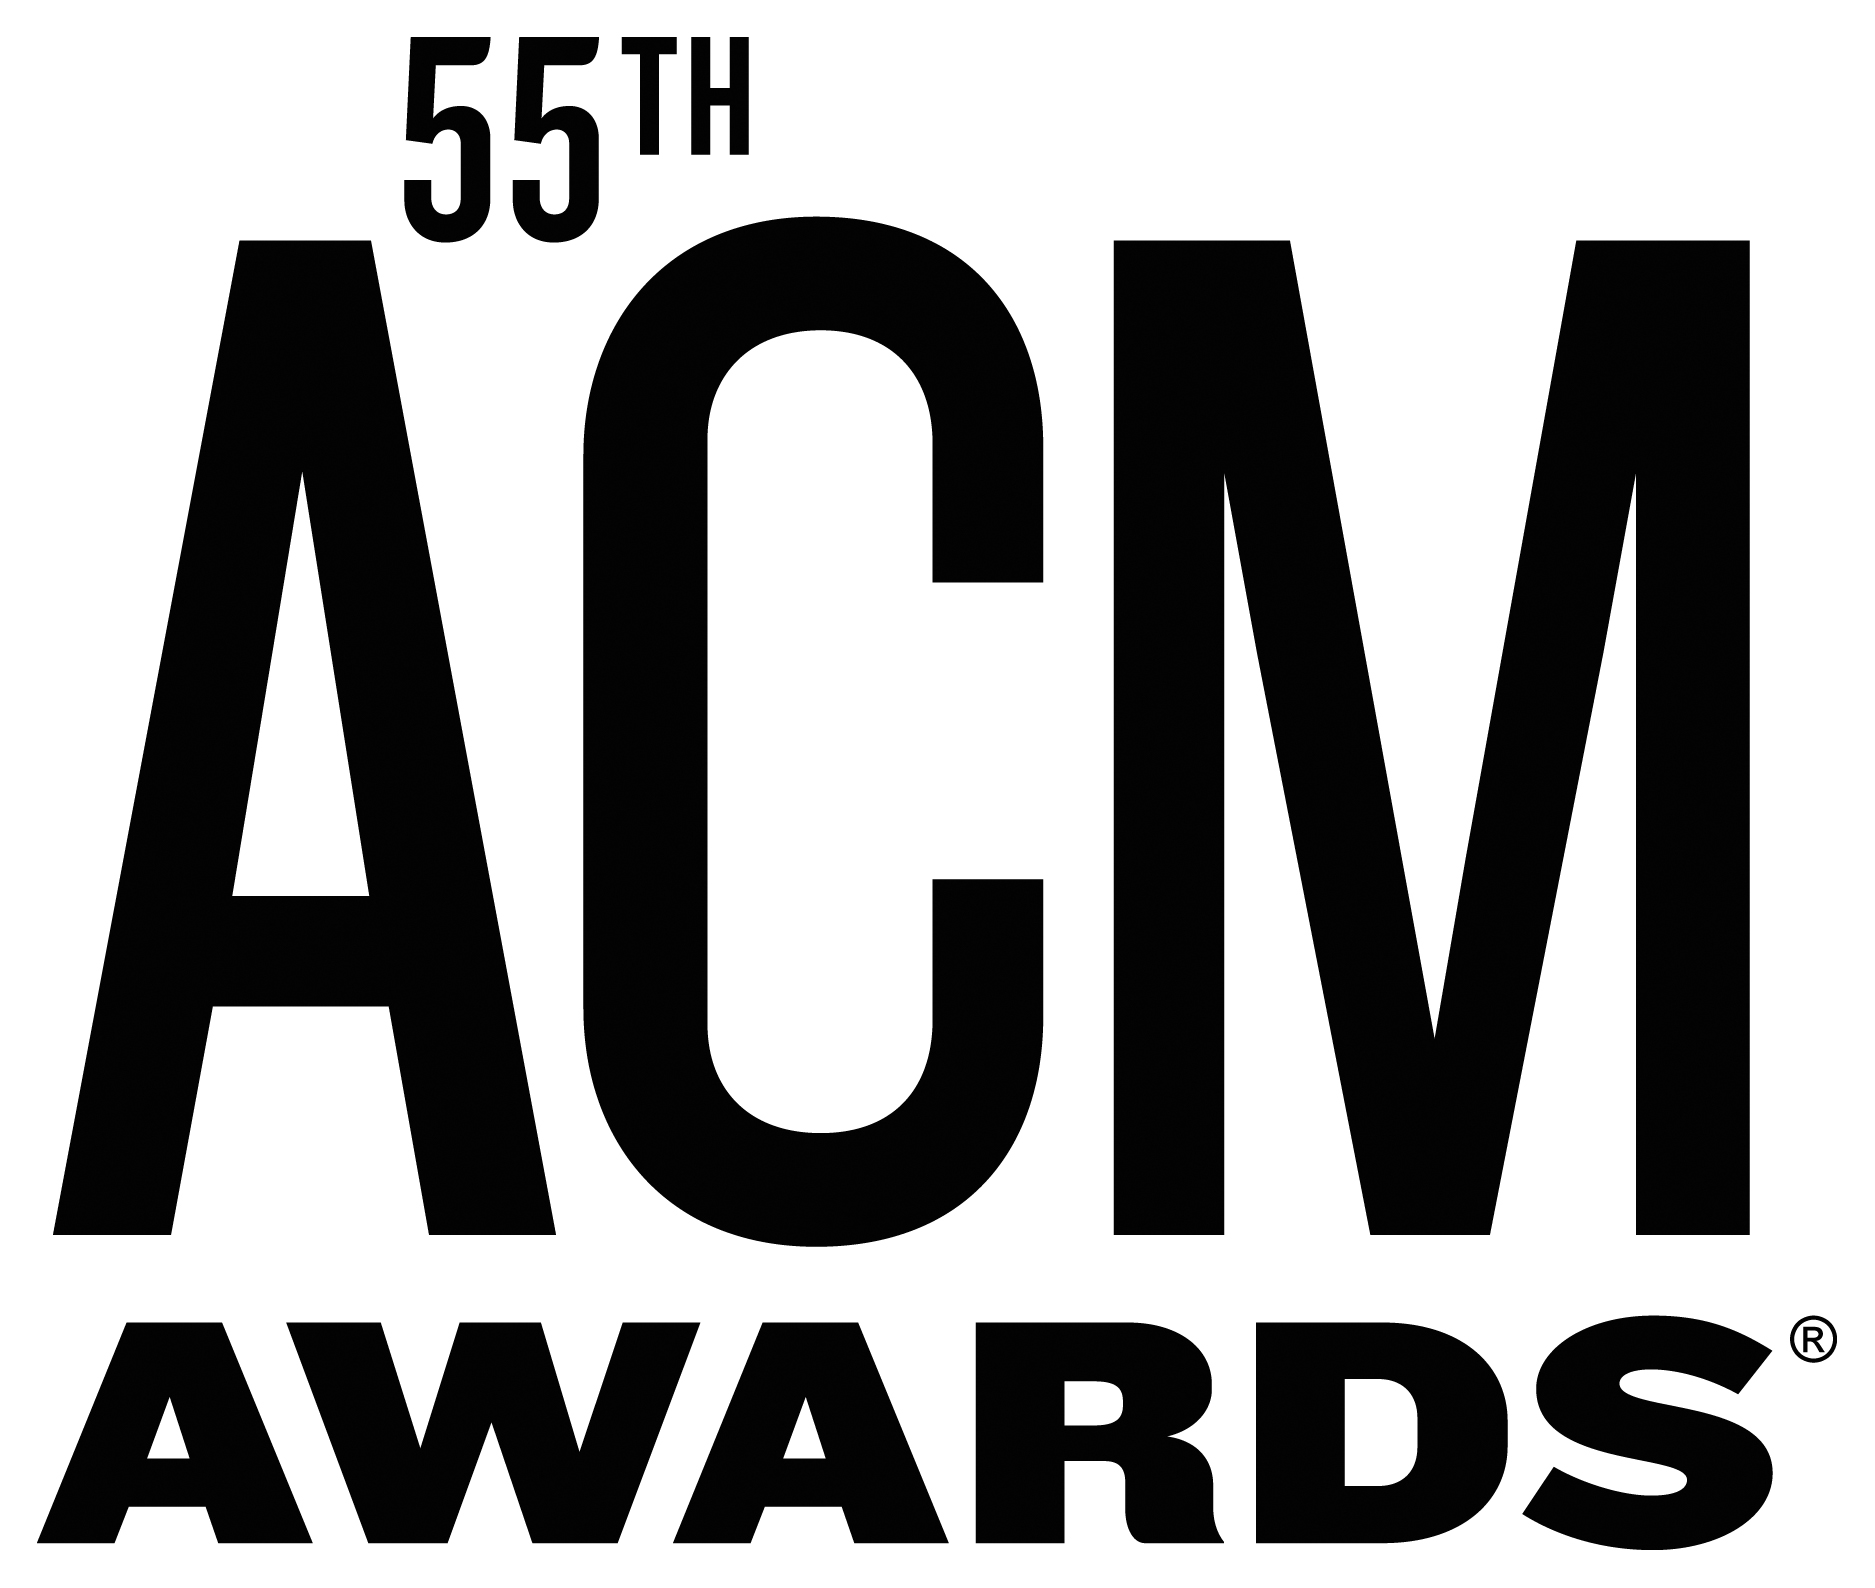 Pressroom THE 55TH ACADEMY OF COUNTRY MUSIC AWARDS HAVE BEEN